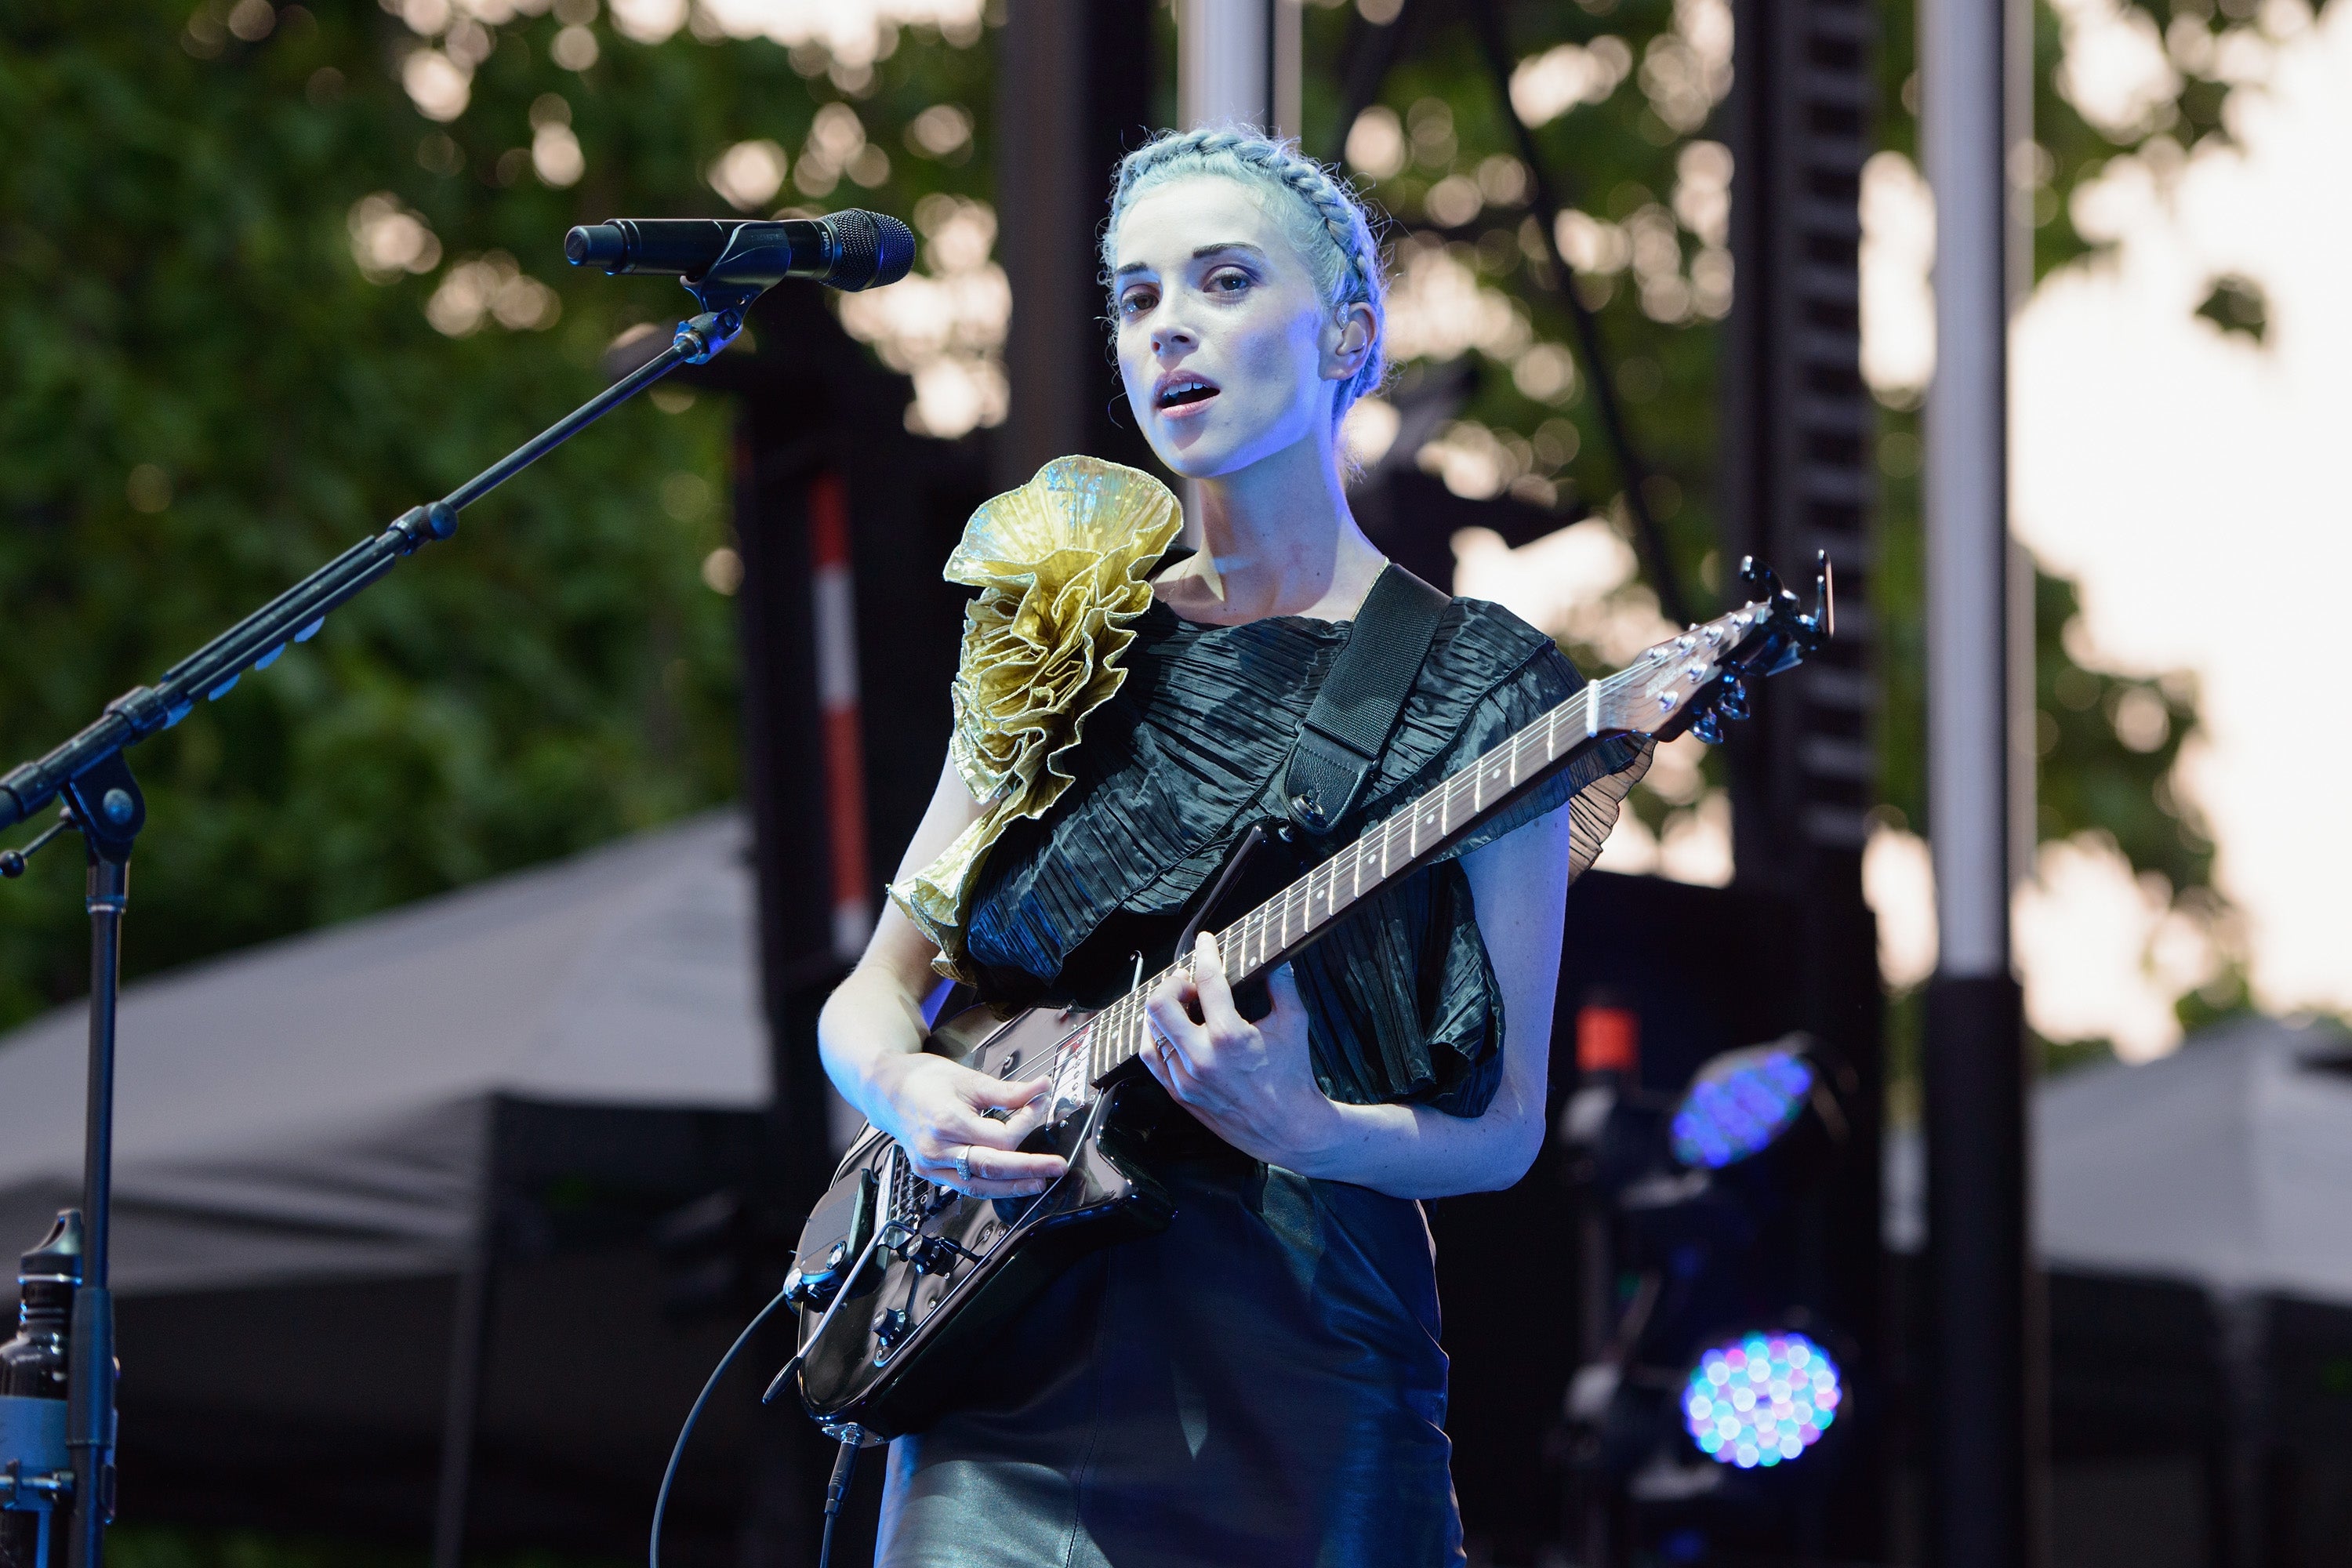 St Vincent performing at the Pitchfork Music Festival in Chicago in 2014